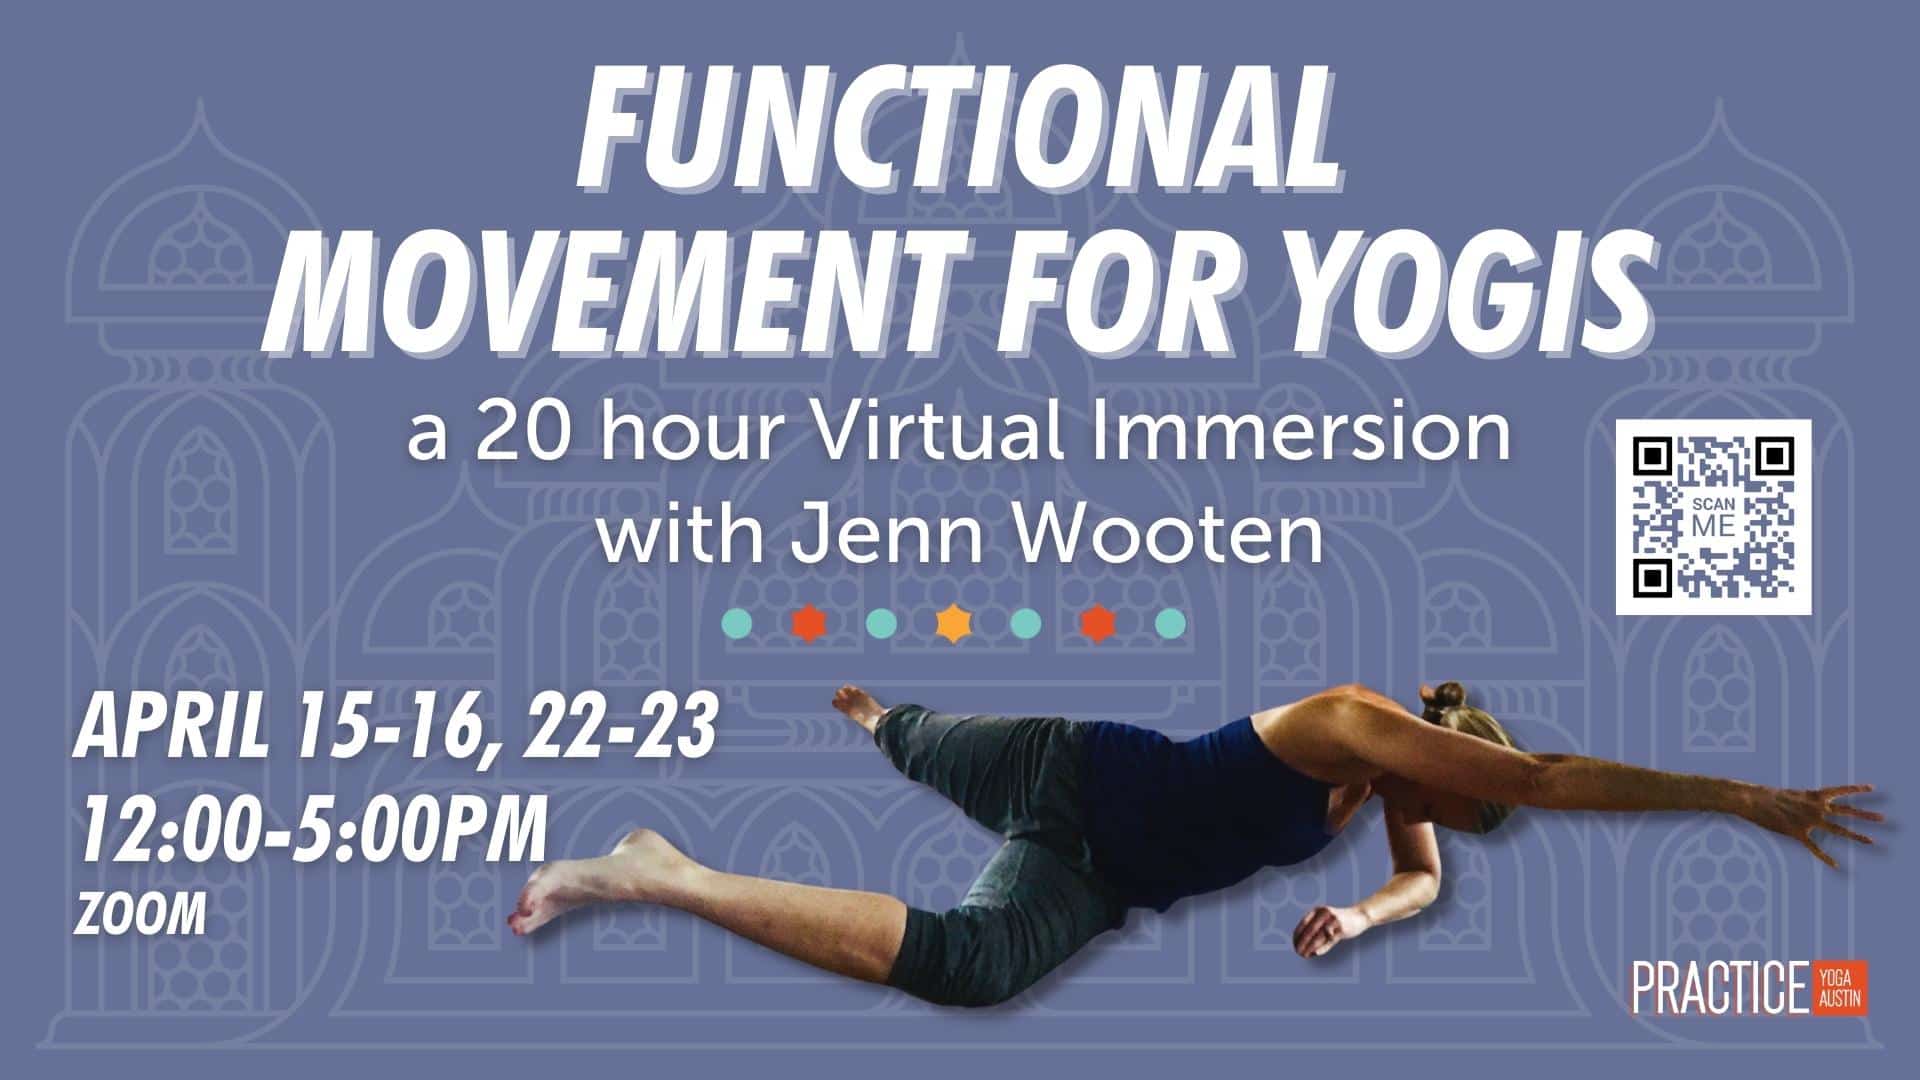 Functional Movement for Yogis with Jenn Wooten